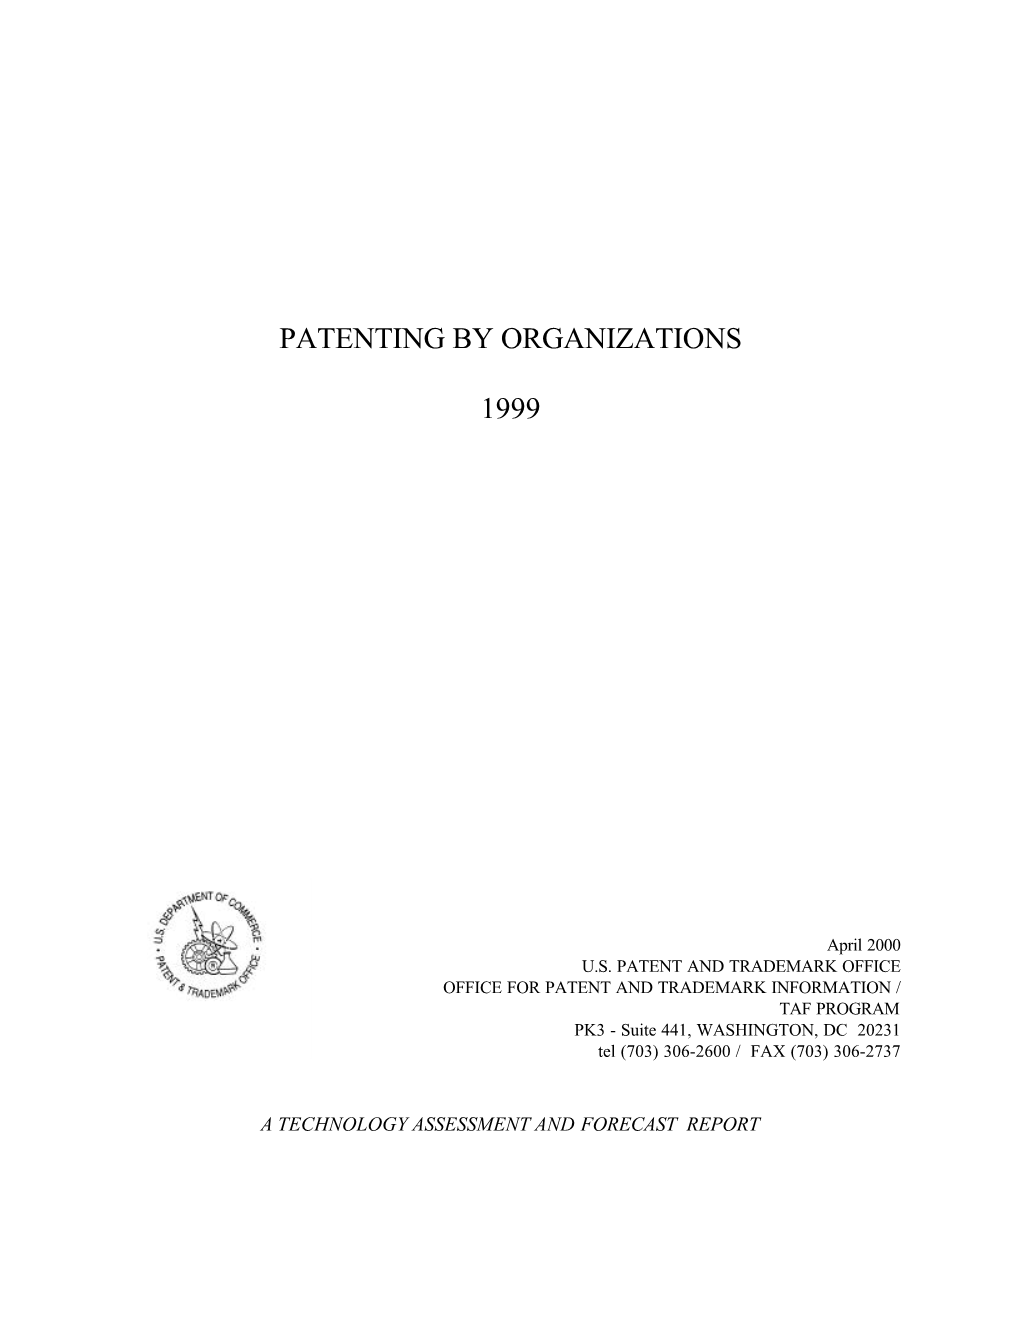 Patenting by Organizations Report, 1999